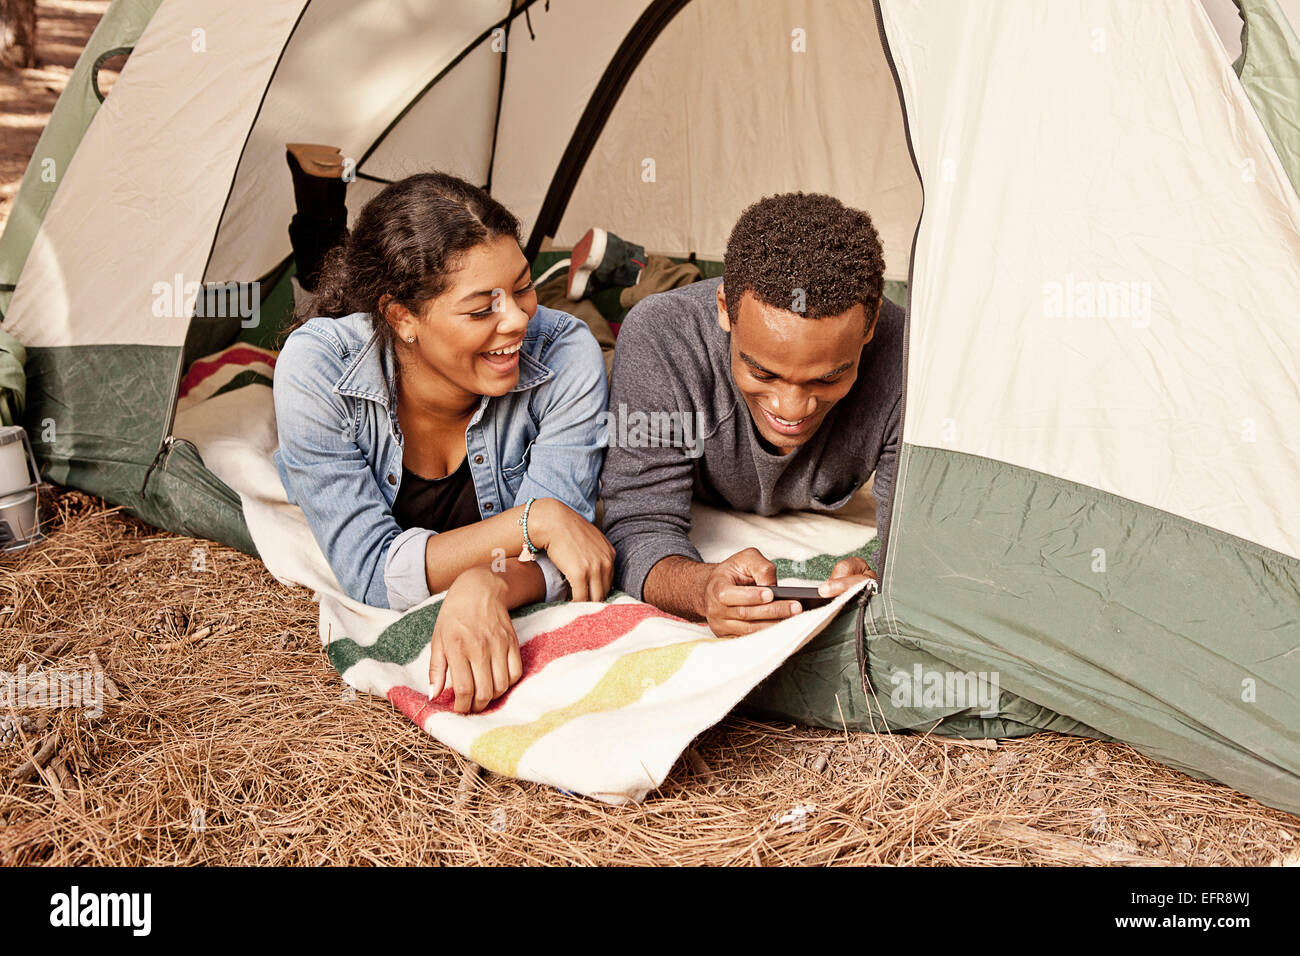 Young couple lying in tent entrance reading texts on smartphone Stock Photo